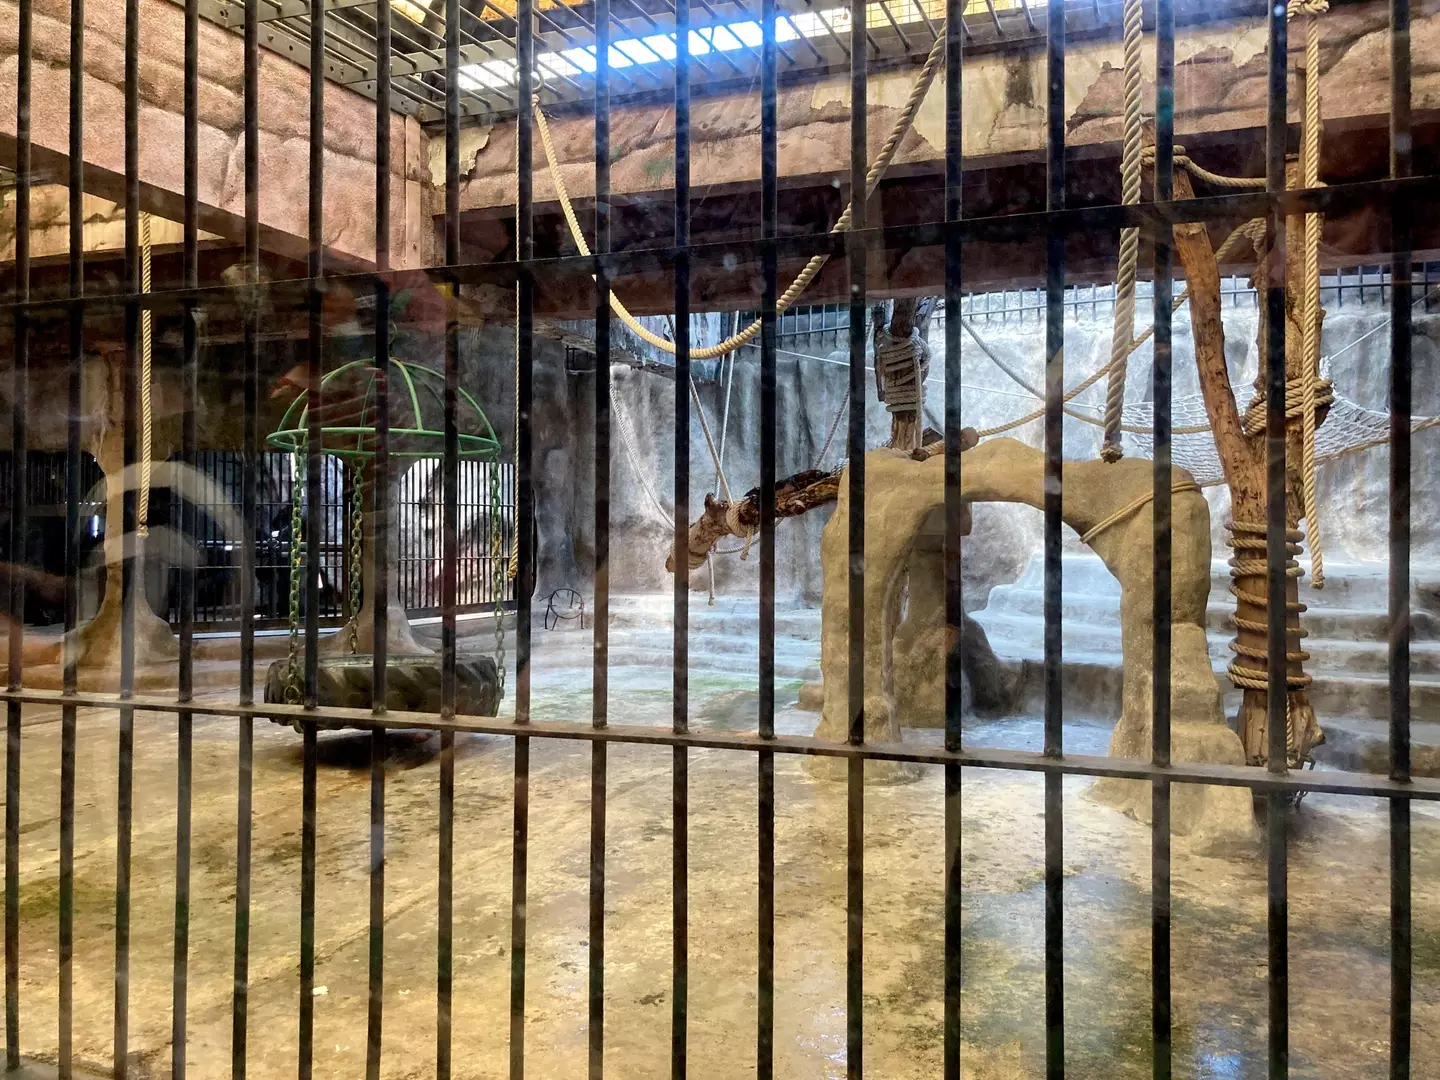 With concrete floors and an enclosure that's 10 metres by 20 metres, there are loud calls to free the poor gorilla.